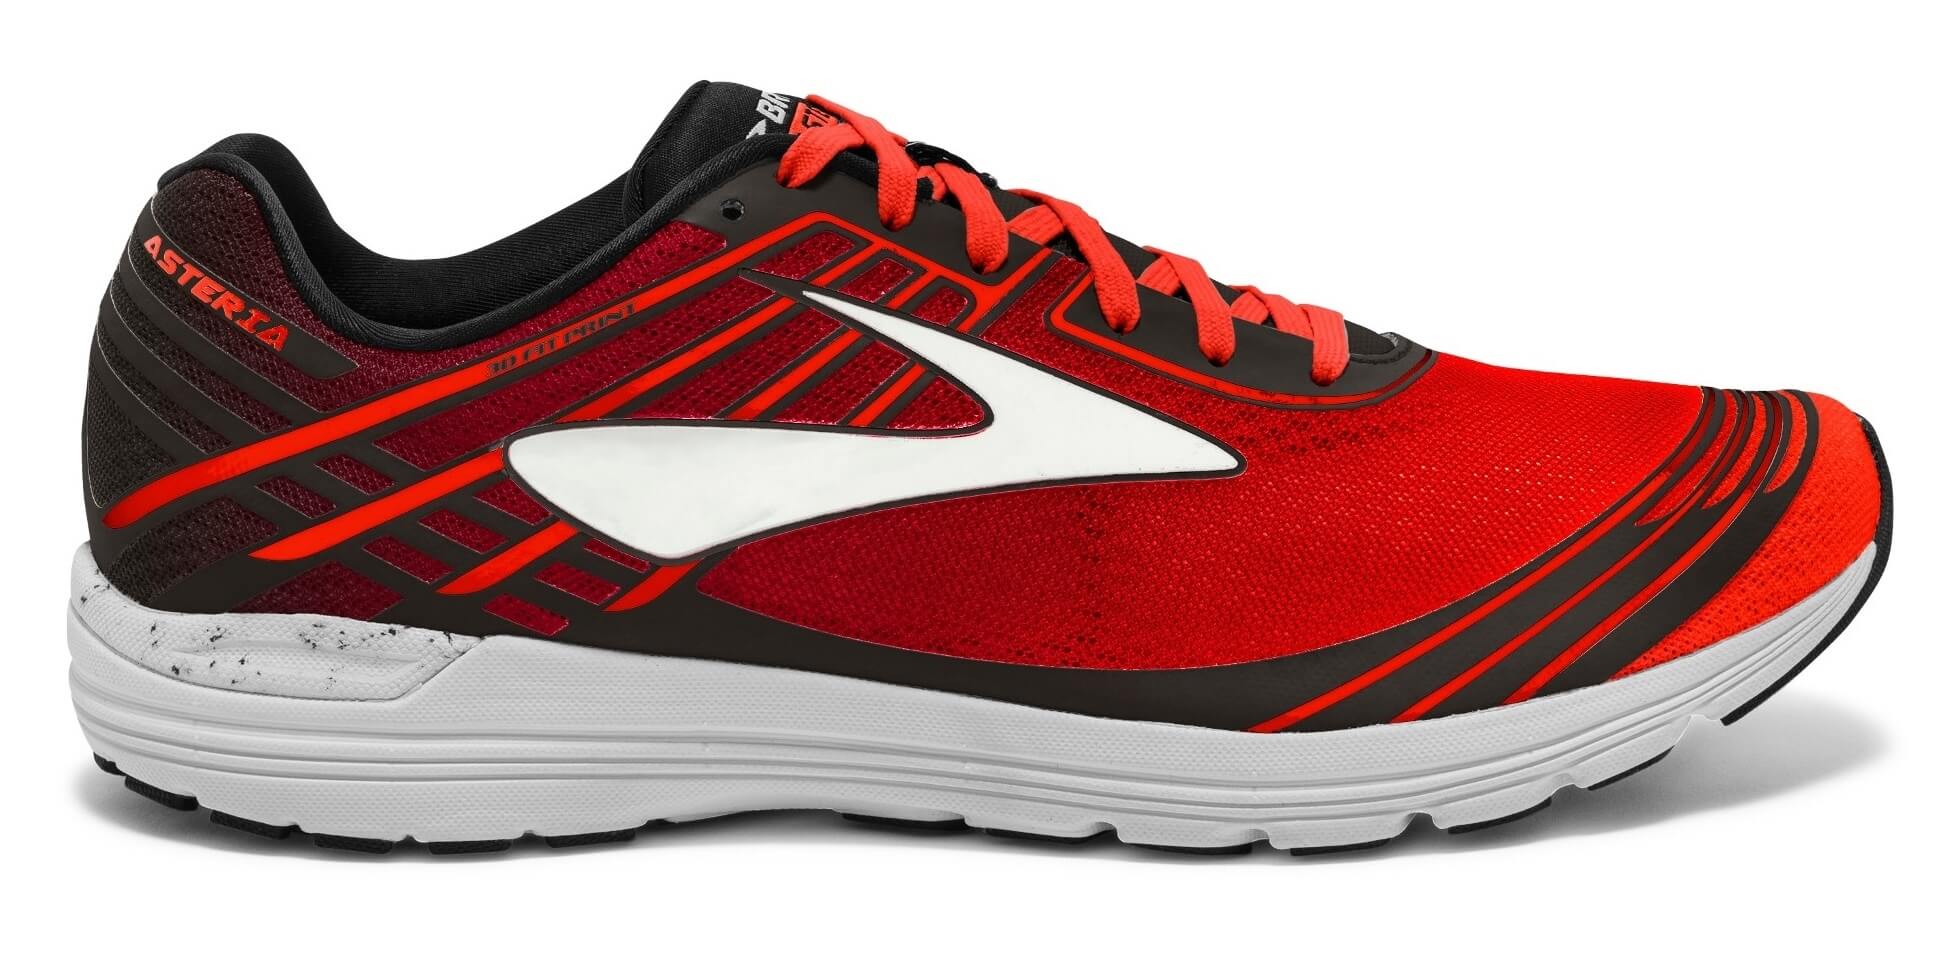 Brooks Asteria Mens Running Shoes Red Lightweight Speed Racing Trainers UK 7-12 